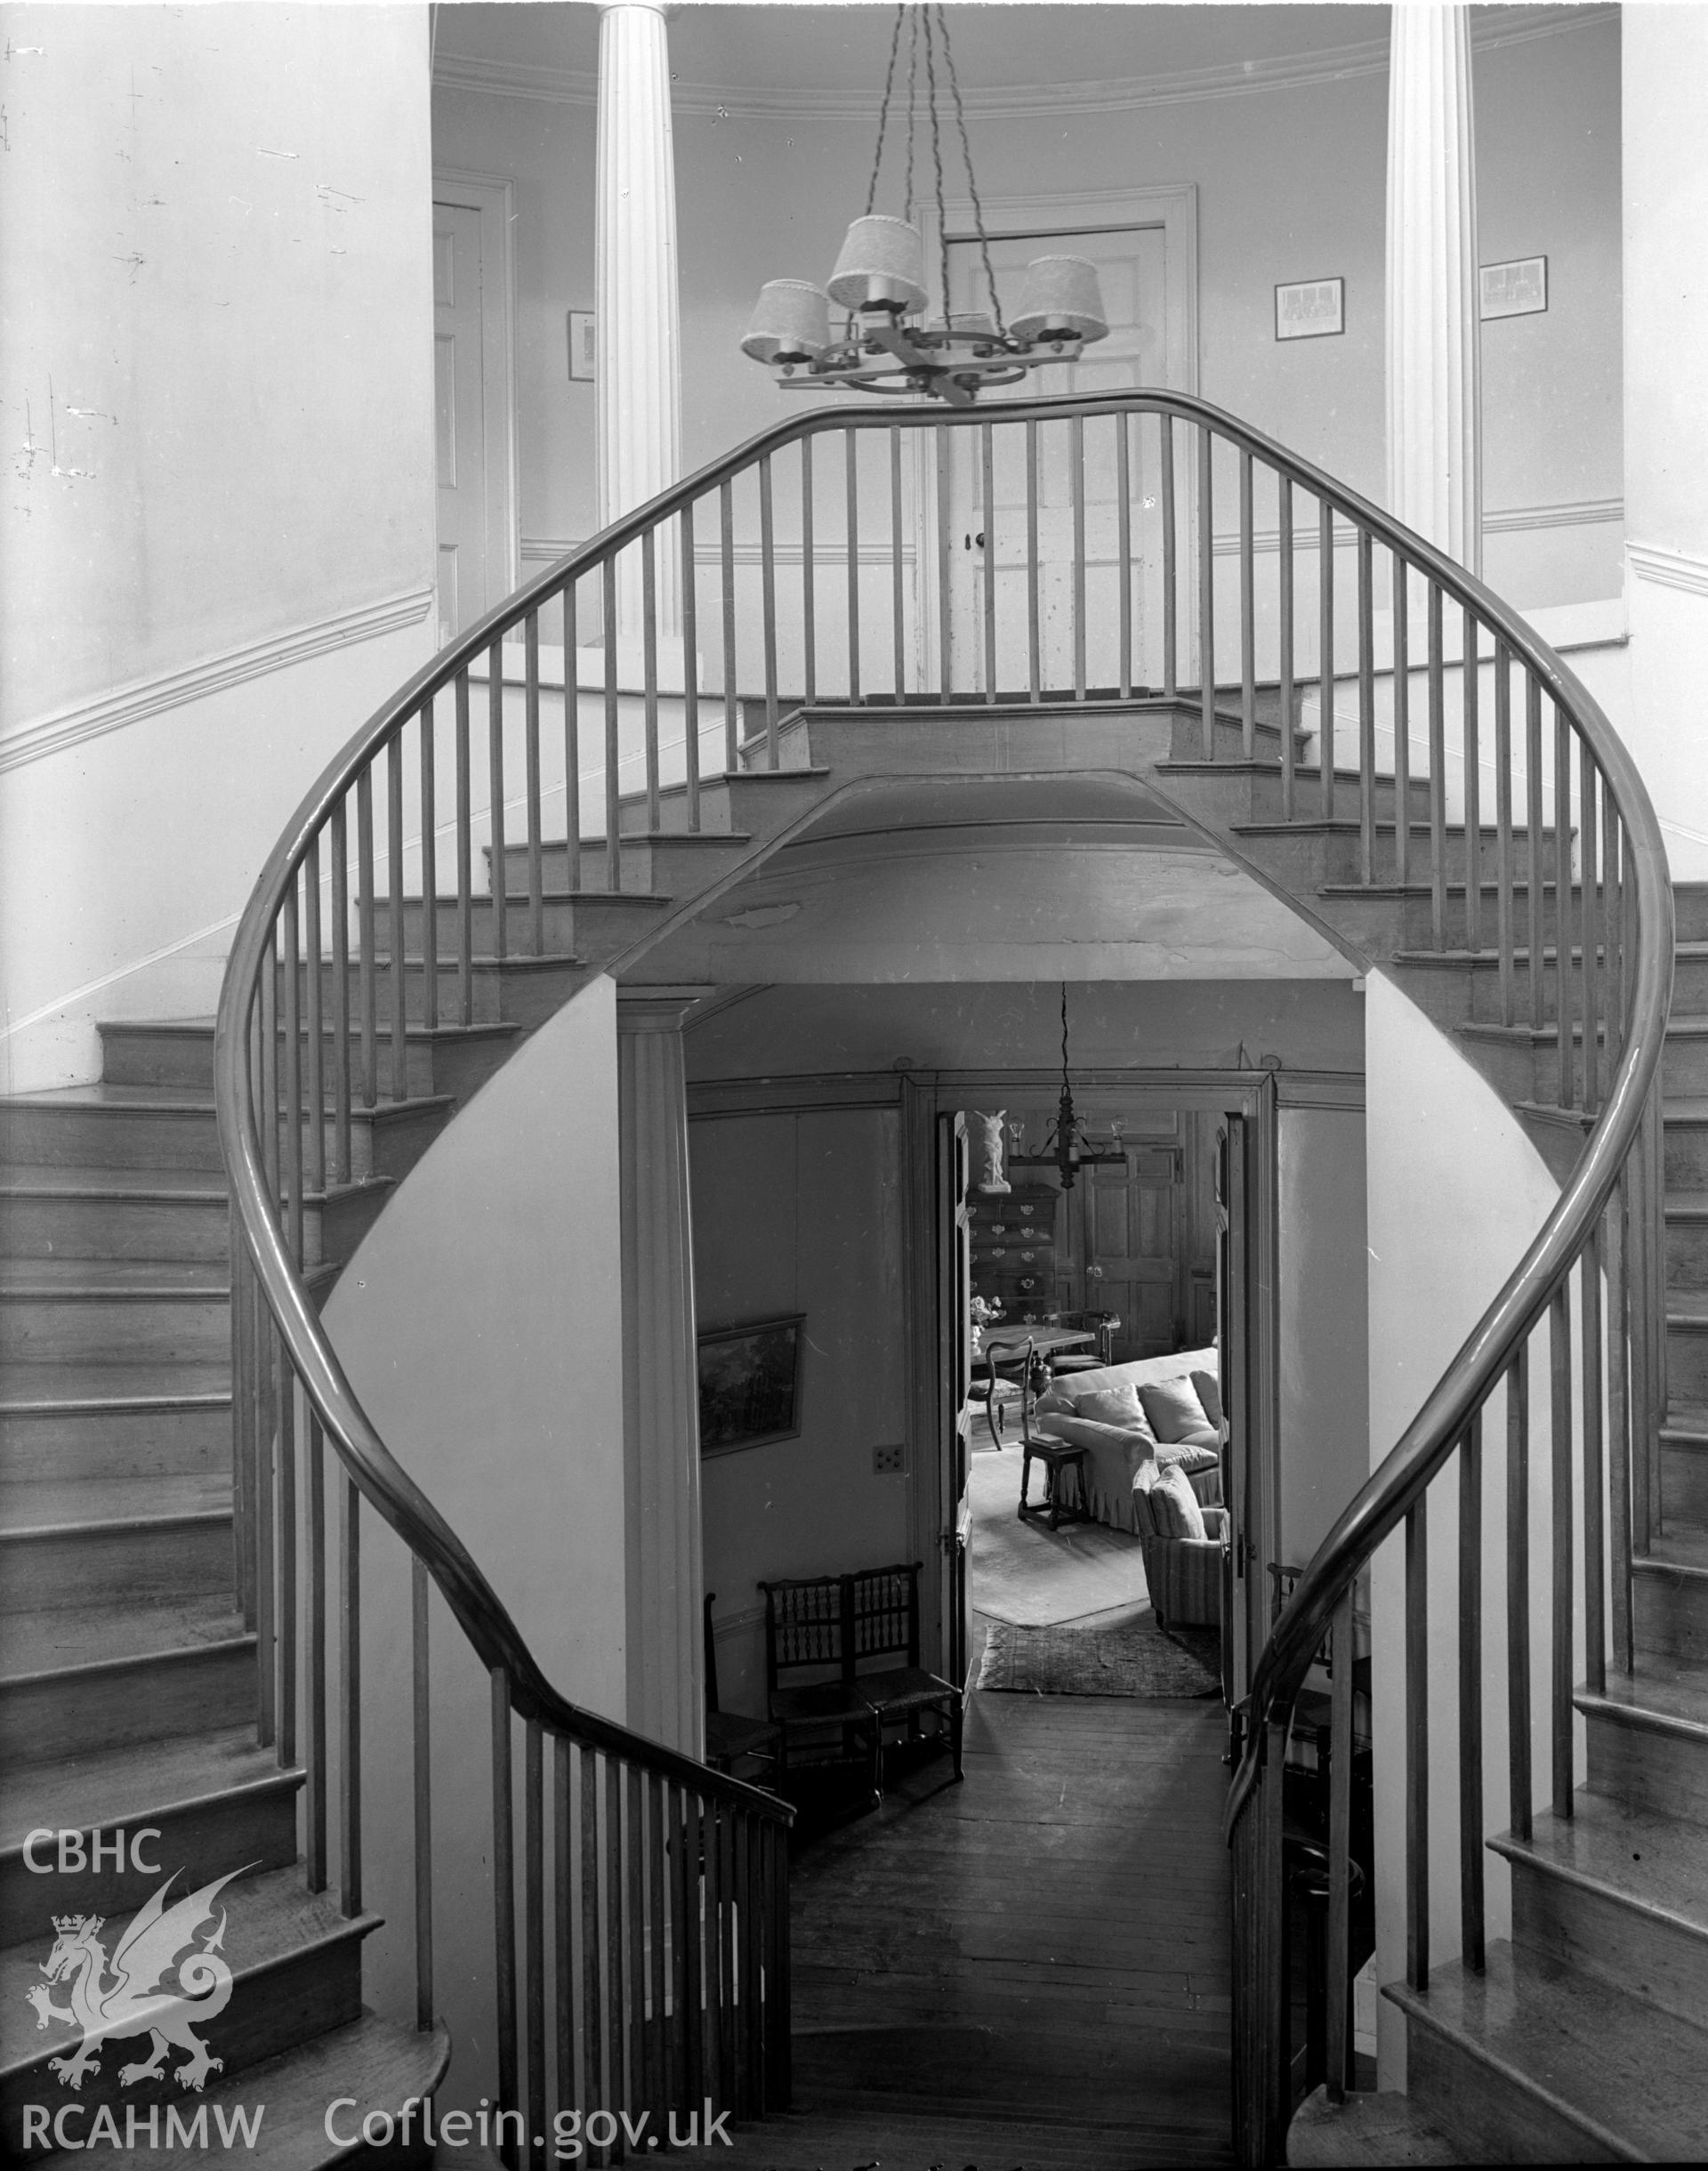 A view of a geometrical wooden staircase, based on an elliptical plan.